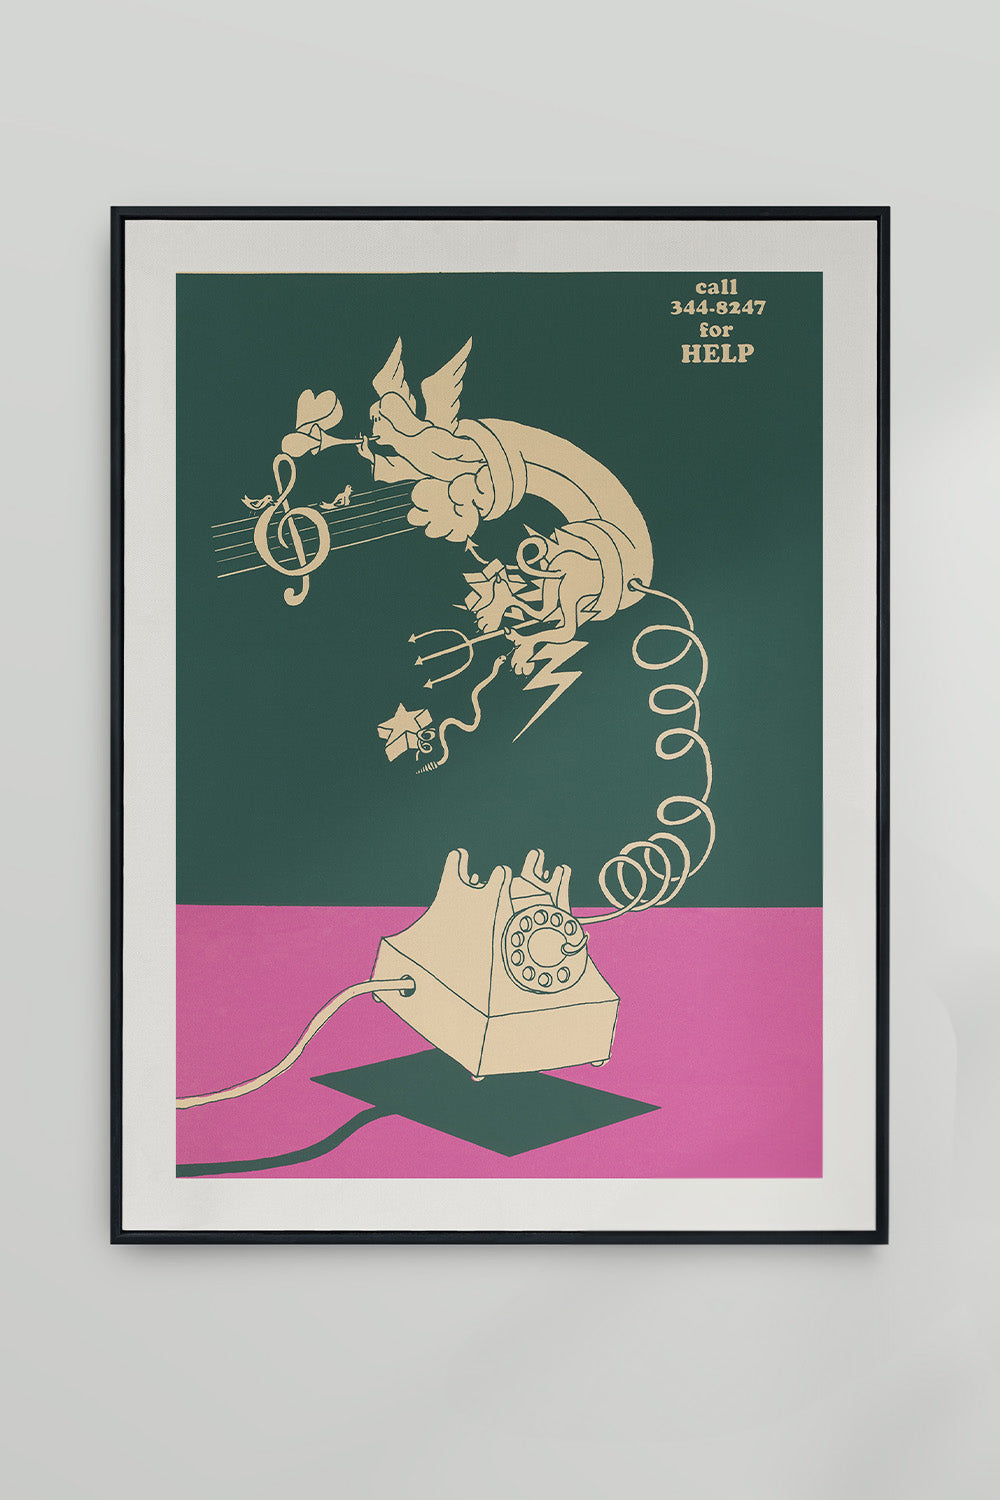 Vintage two-tone art print featuring a tan rotary phone and music note on a deep green and hot pink background.